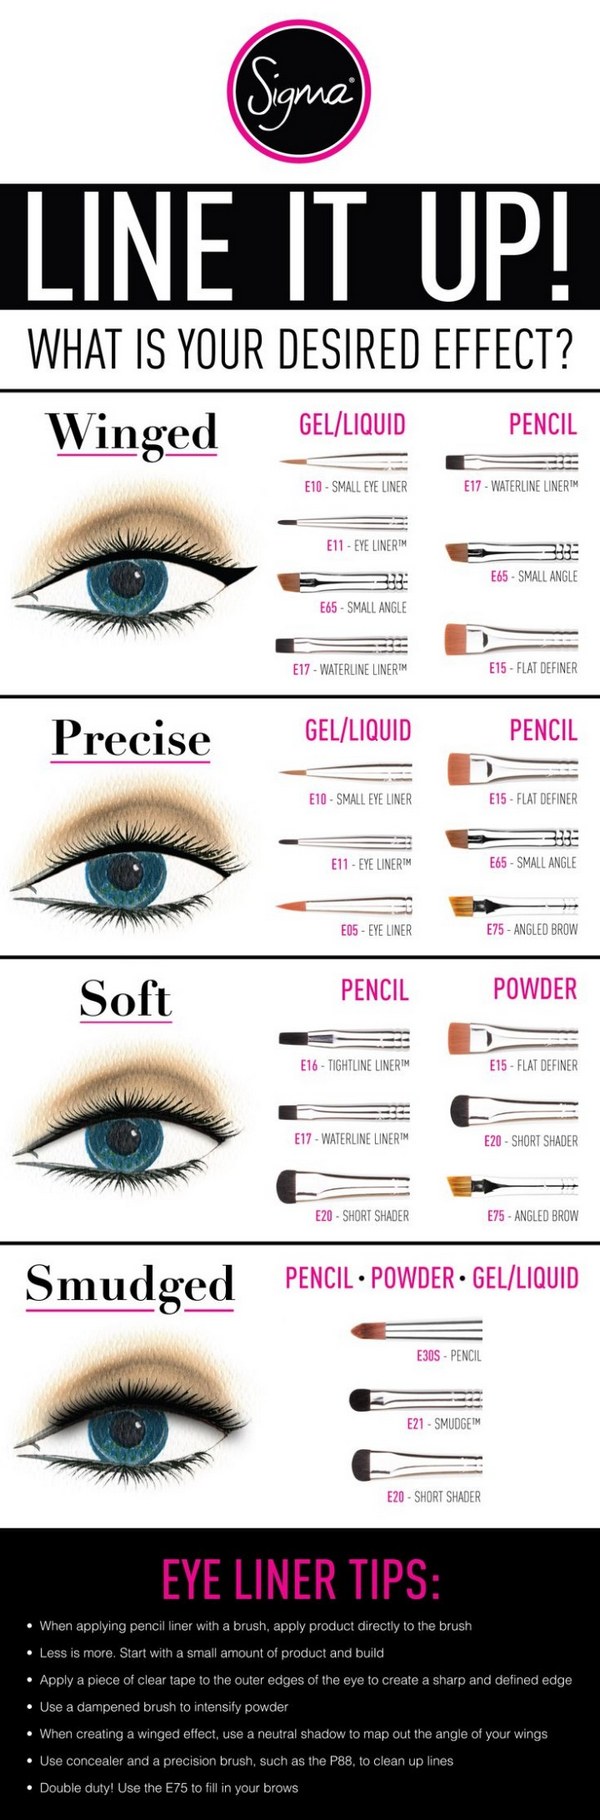 What is Your Desired Eye Liner Effect via Sigma Makeup